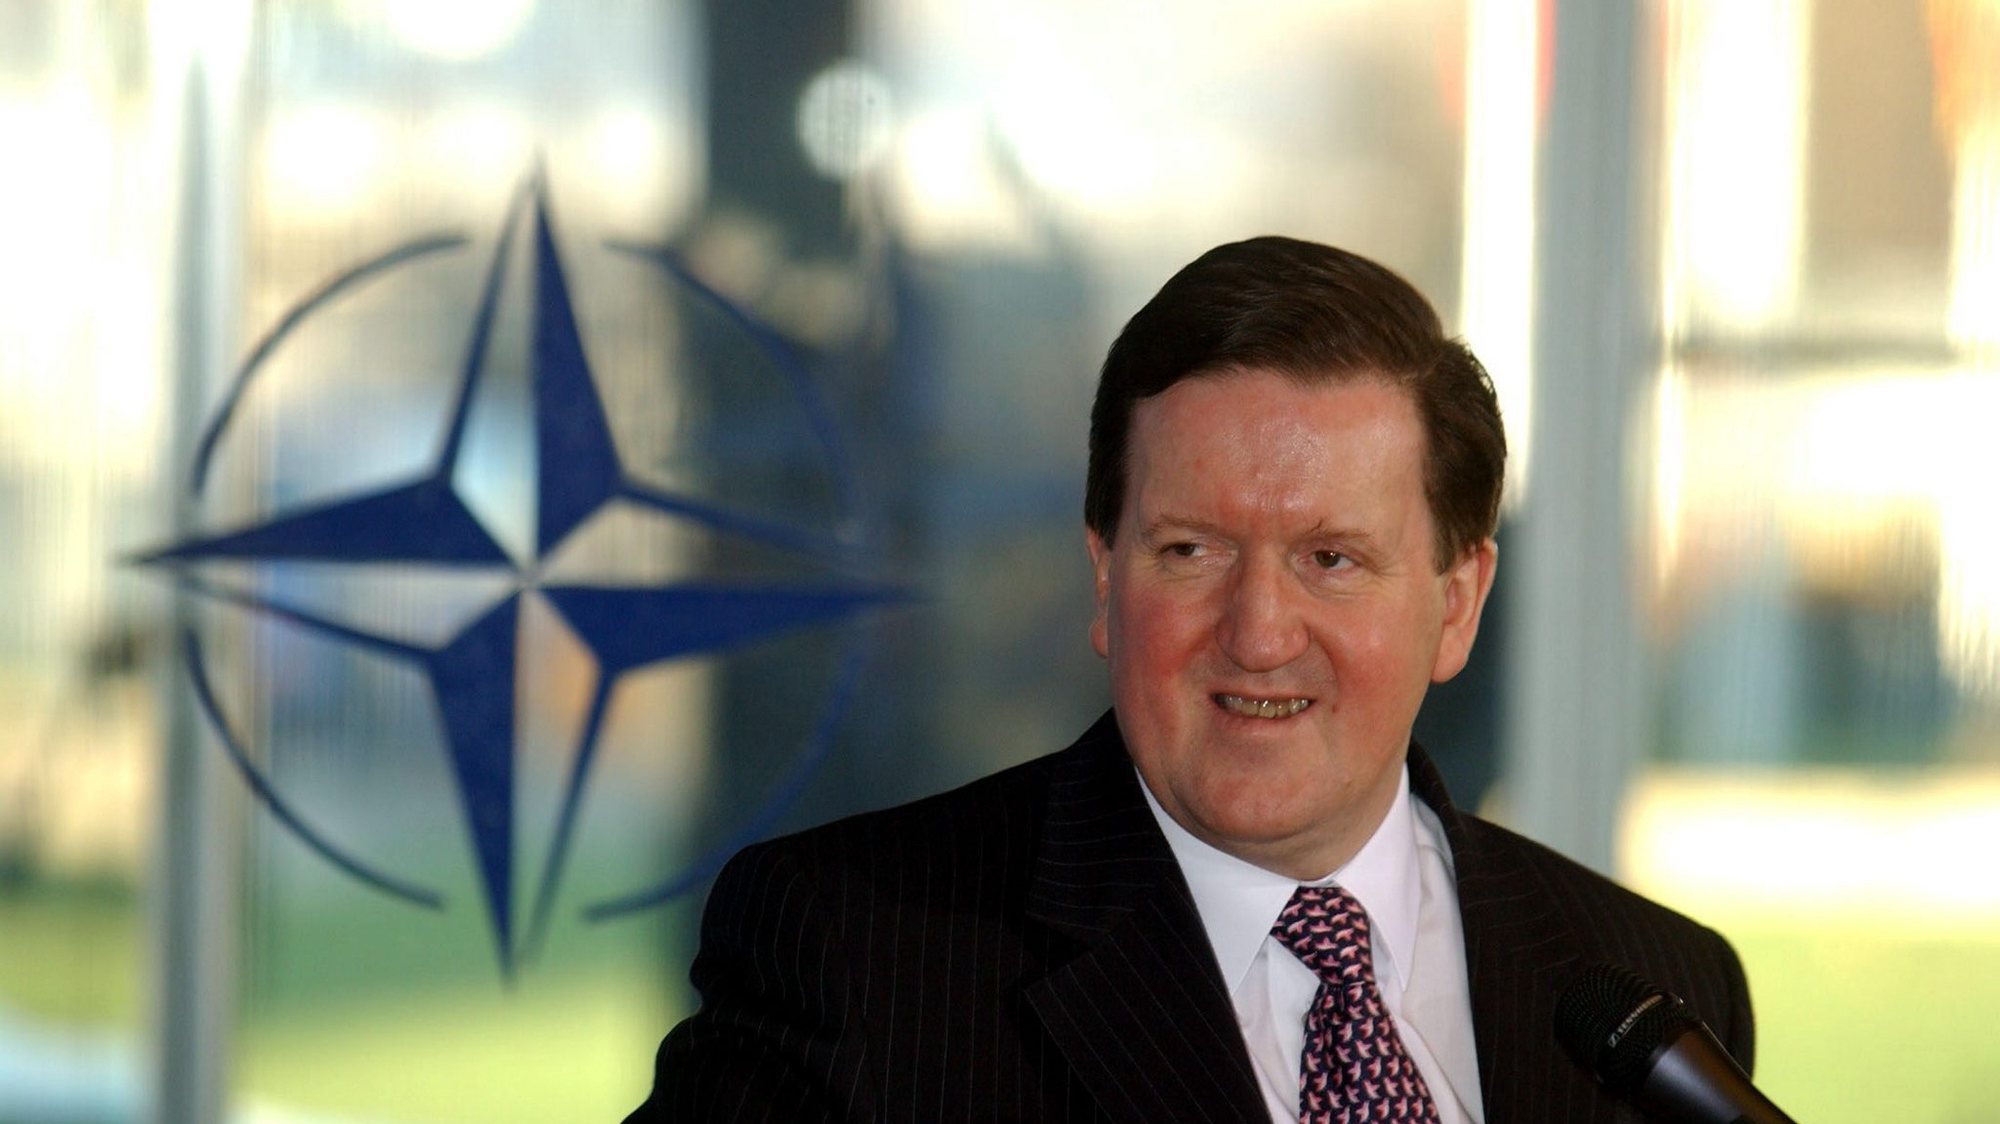 NATO Secretary General Lord George Robertson before leaving NATO headquarters in Brussels after his last day in office, 17 December 2003. The former British defence minister served a four-year term as head of the North Atlantic Treaty Organisation and has accepted a leading position with telecommunications giant Cable and Wireless. He is replaced January 01 by the former Dutch foreign minister Jaap de Hoop Scheffer.  EPA/NATO